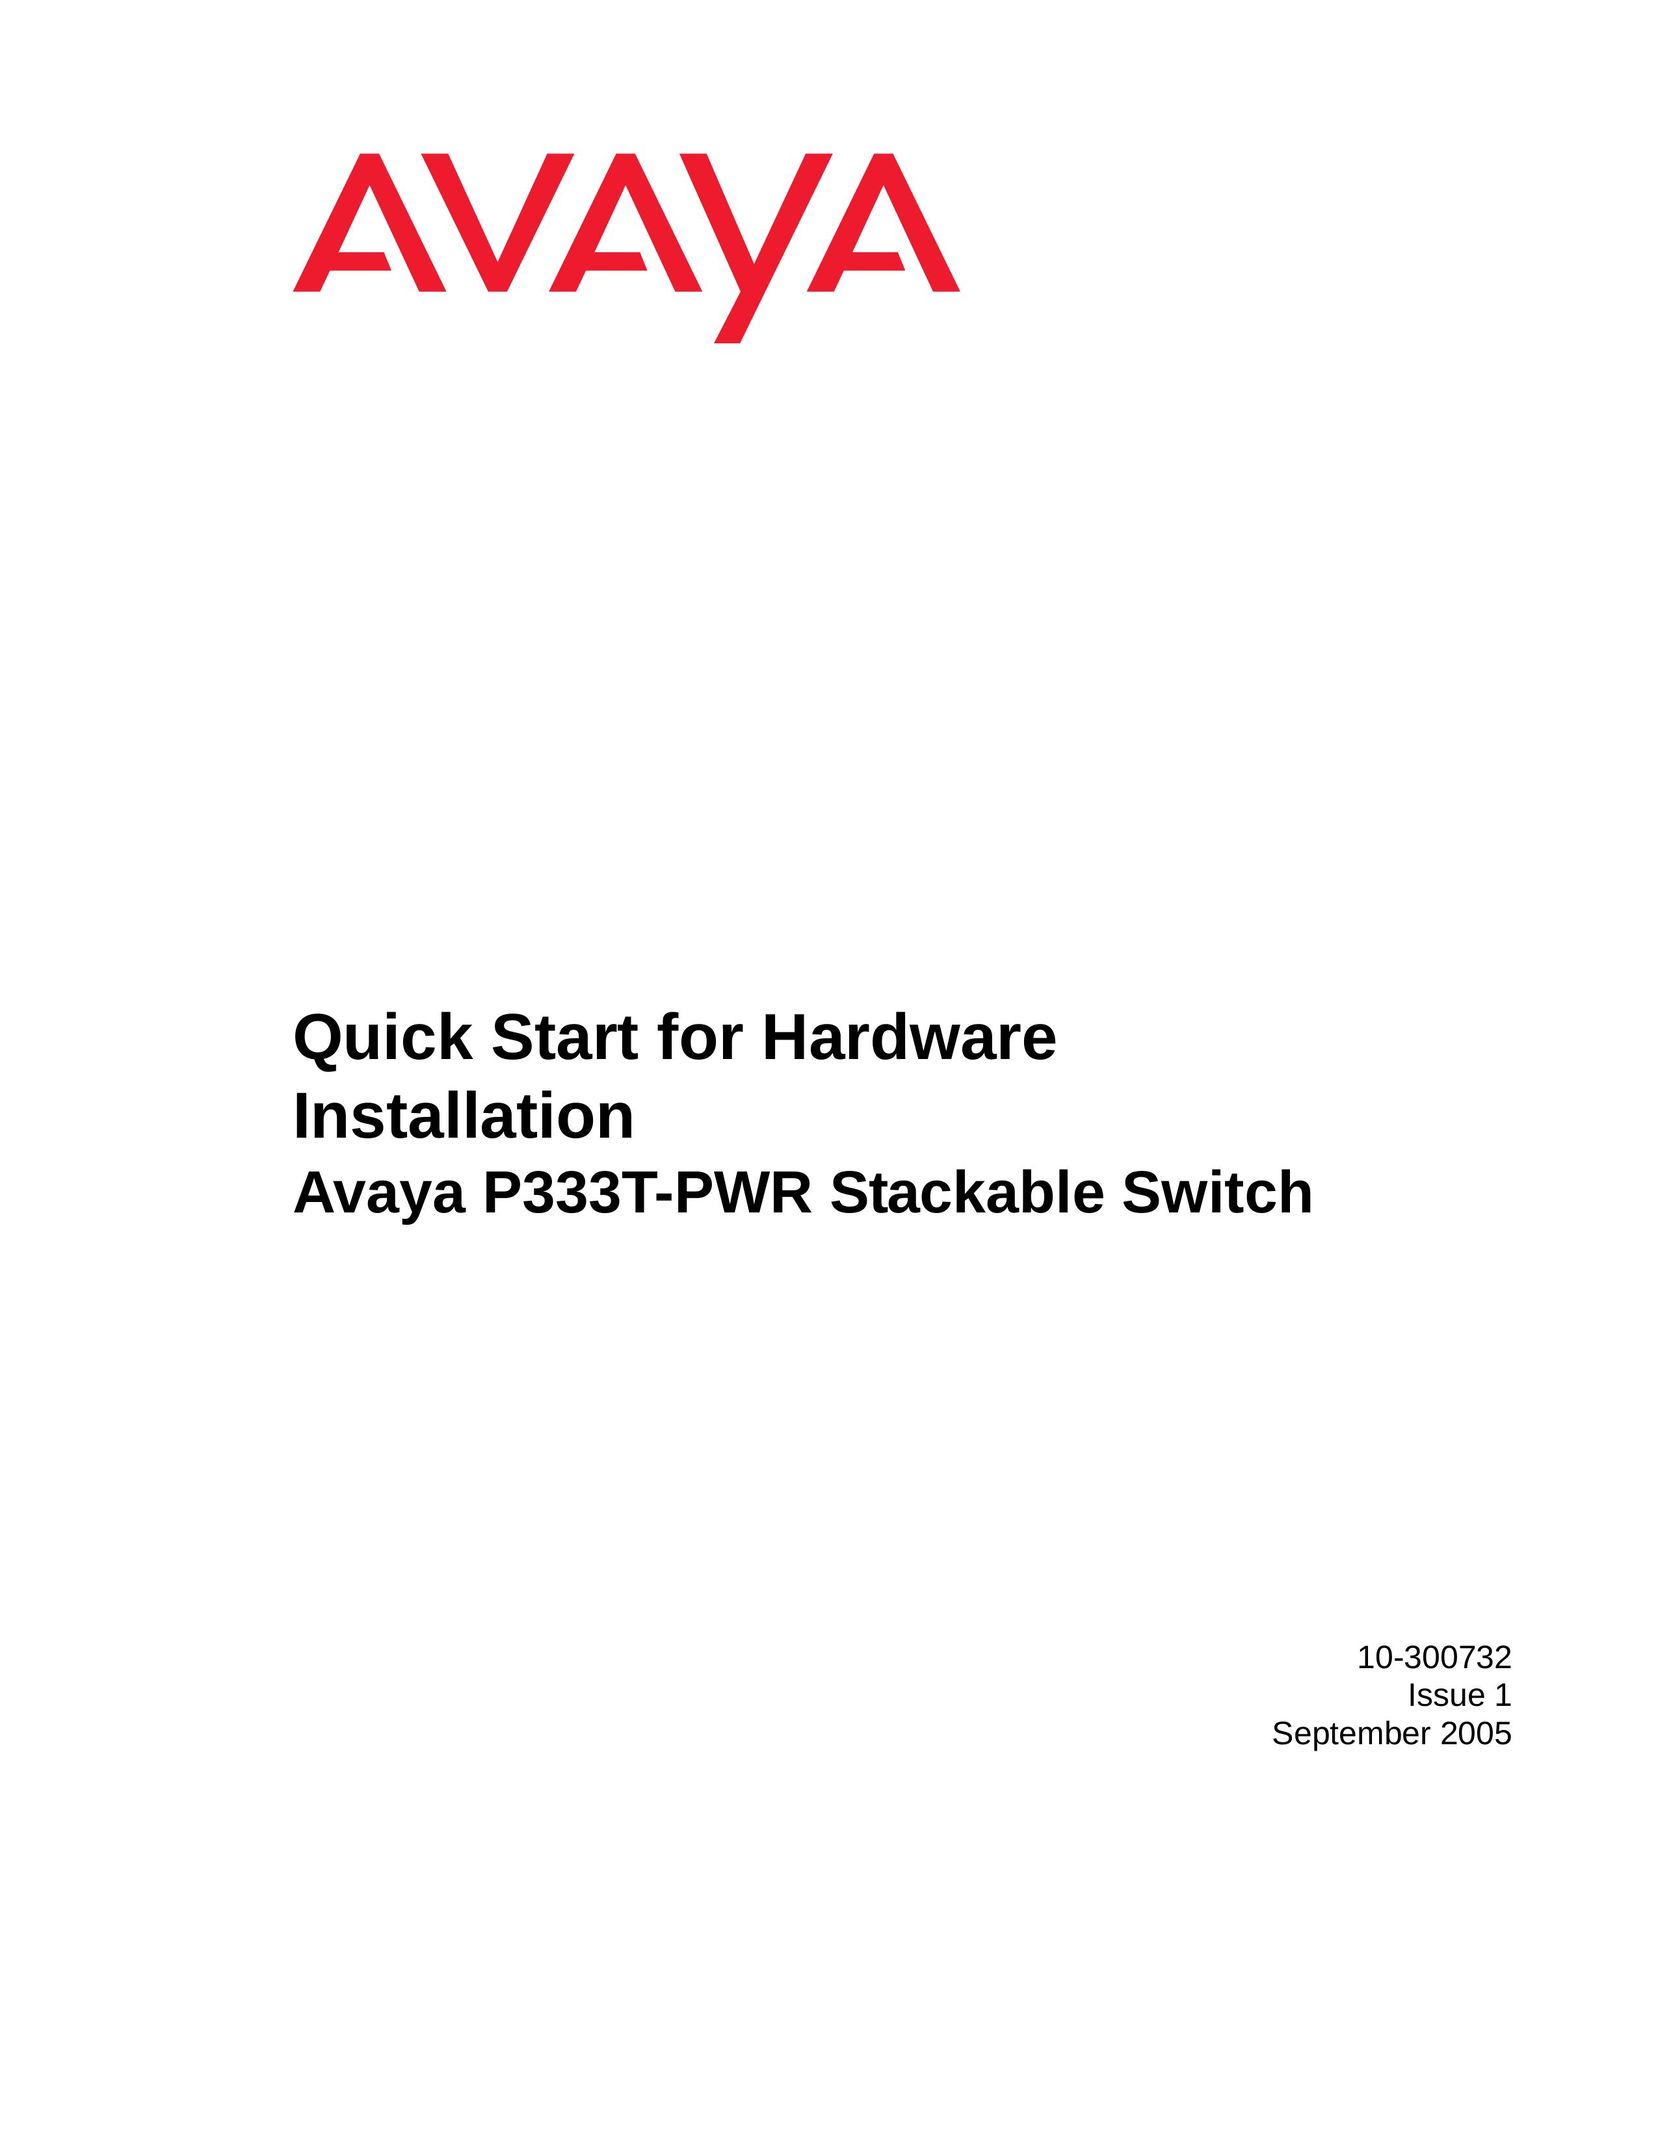 Andis Company P333T-PWR Switch User Manual